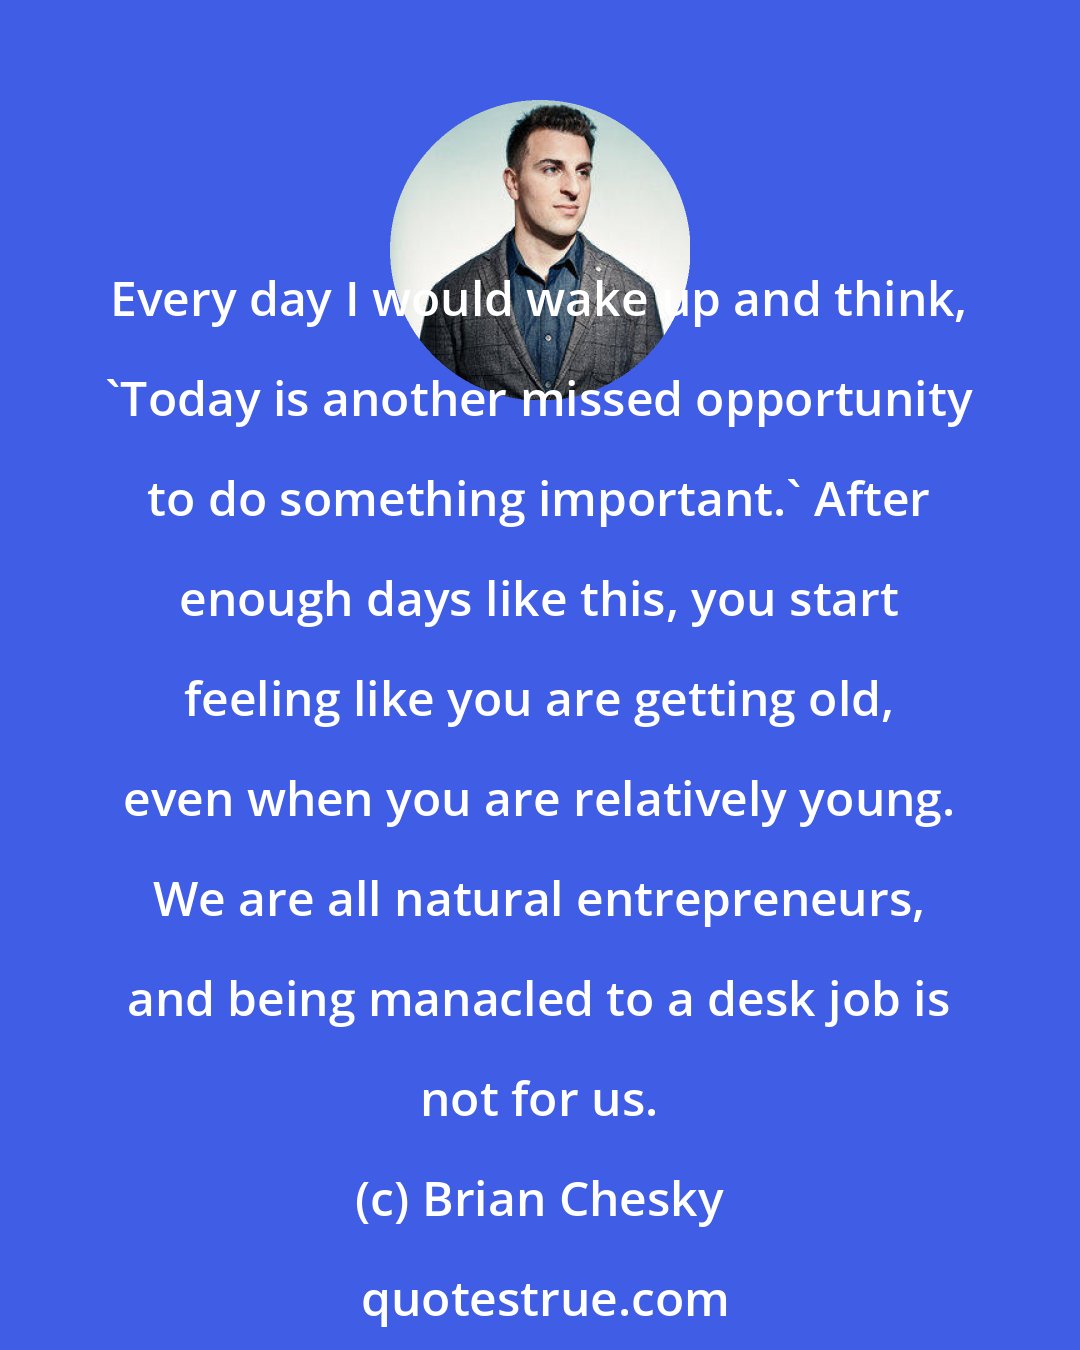 Brian Chesky: Every day I would wake up and think, 'Today is another missed opportunity to do something important.' After enough days like this, you start feeling like you are getting old, even when you are relatively young. We are all natural entrepreneurs, and being manacled to a desk job is not for us.